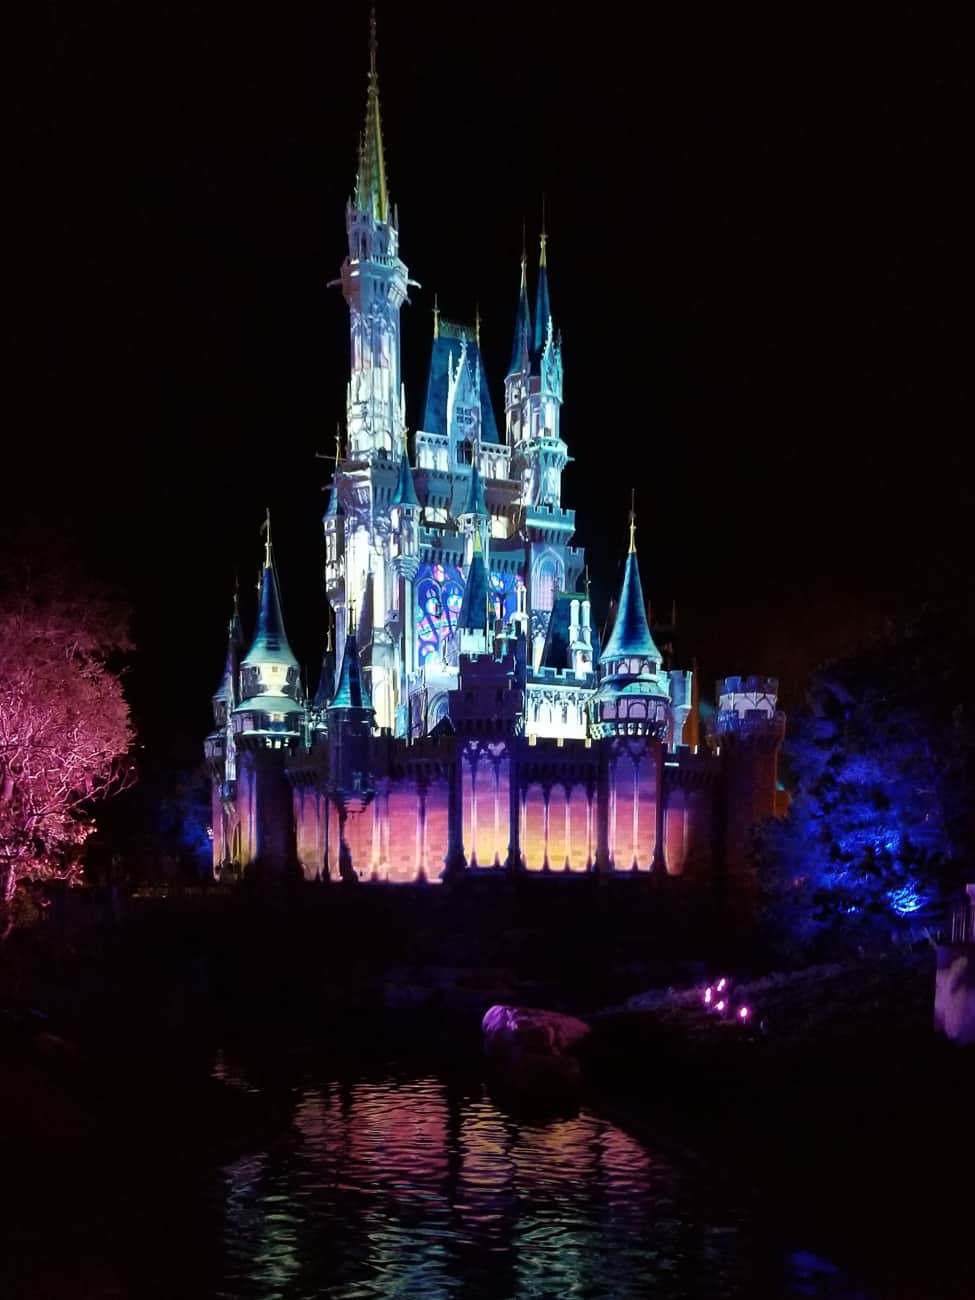 How to take better Disney World pictures at night